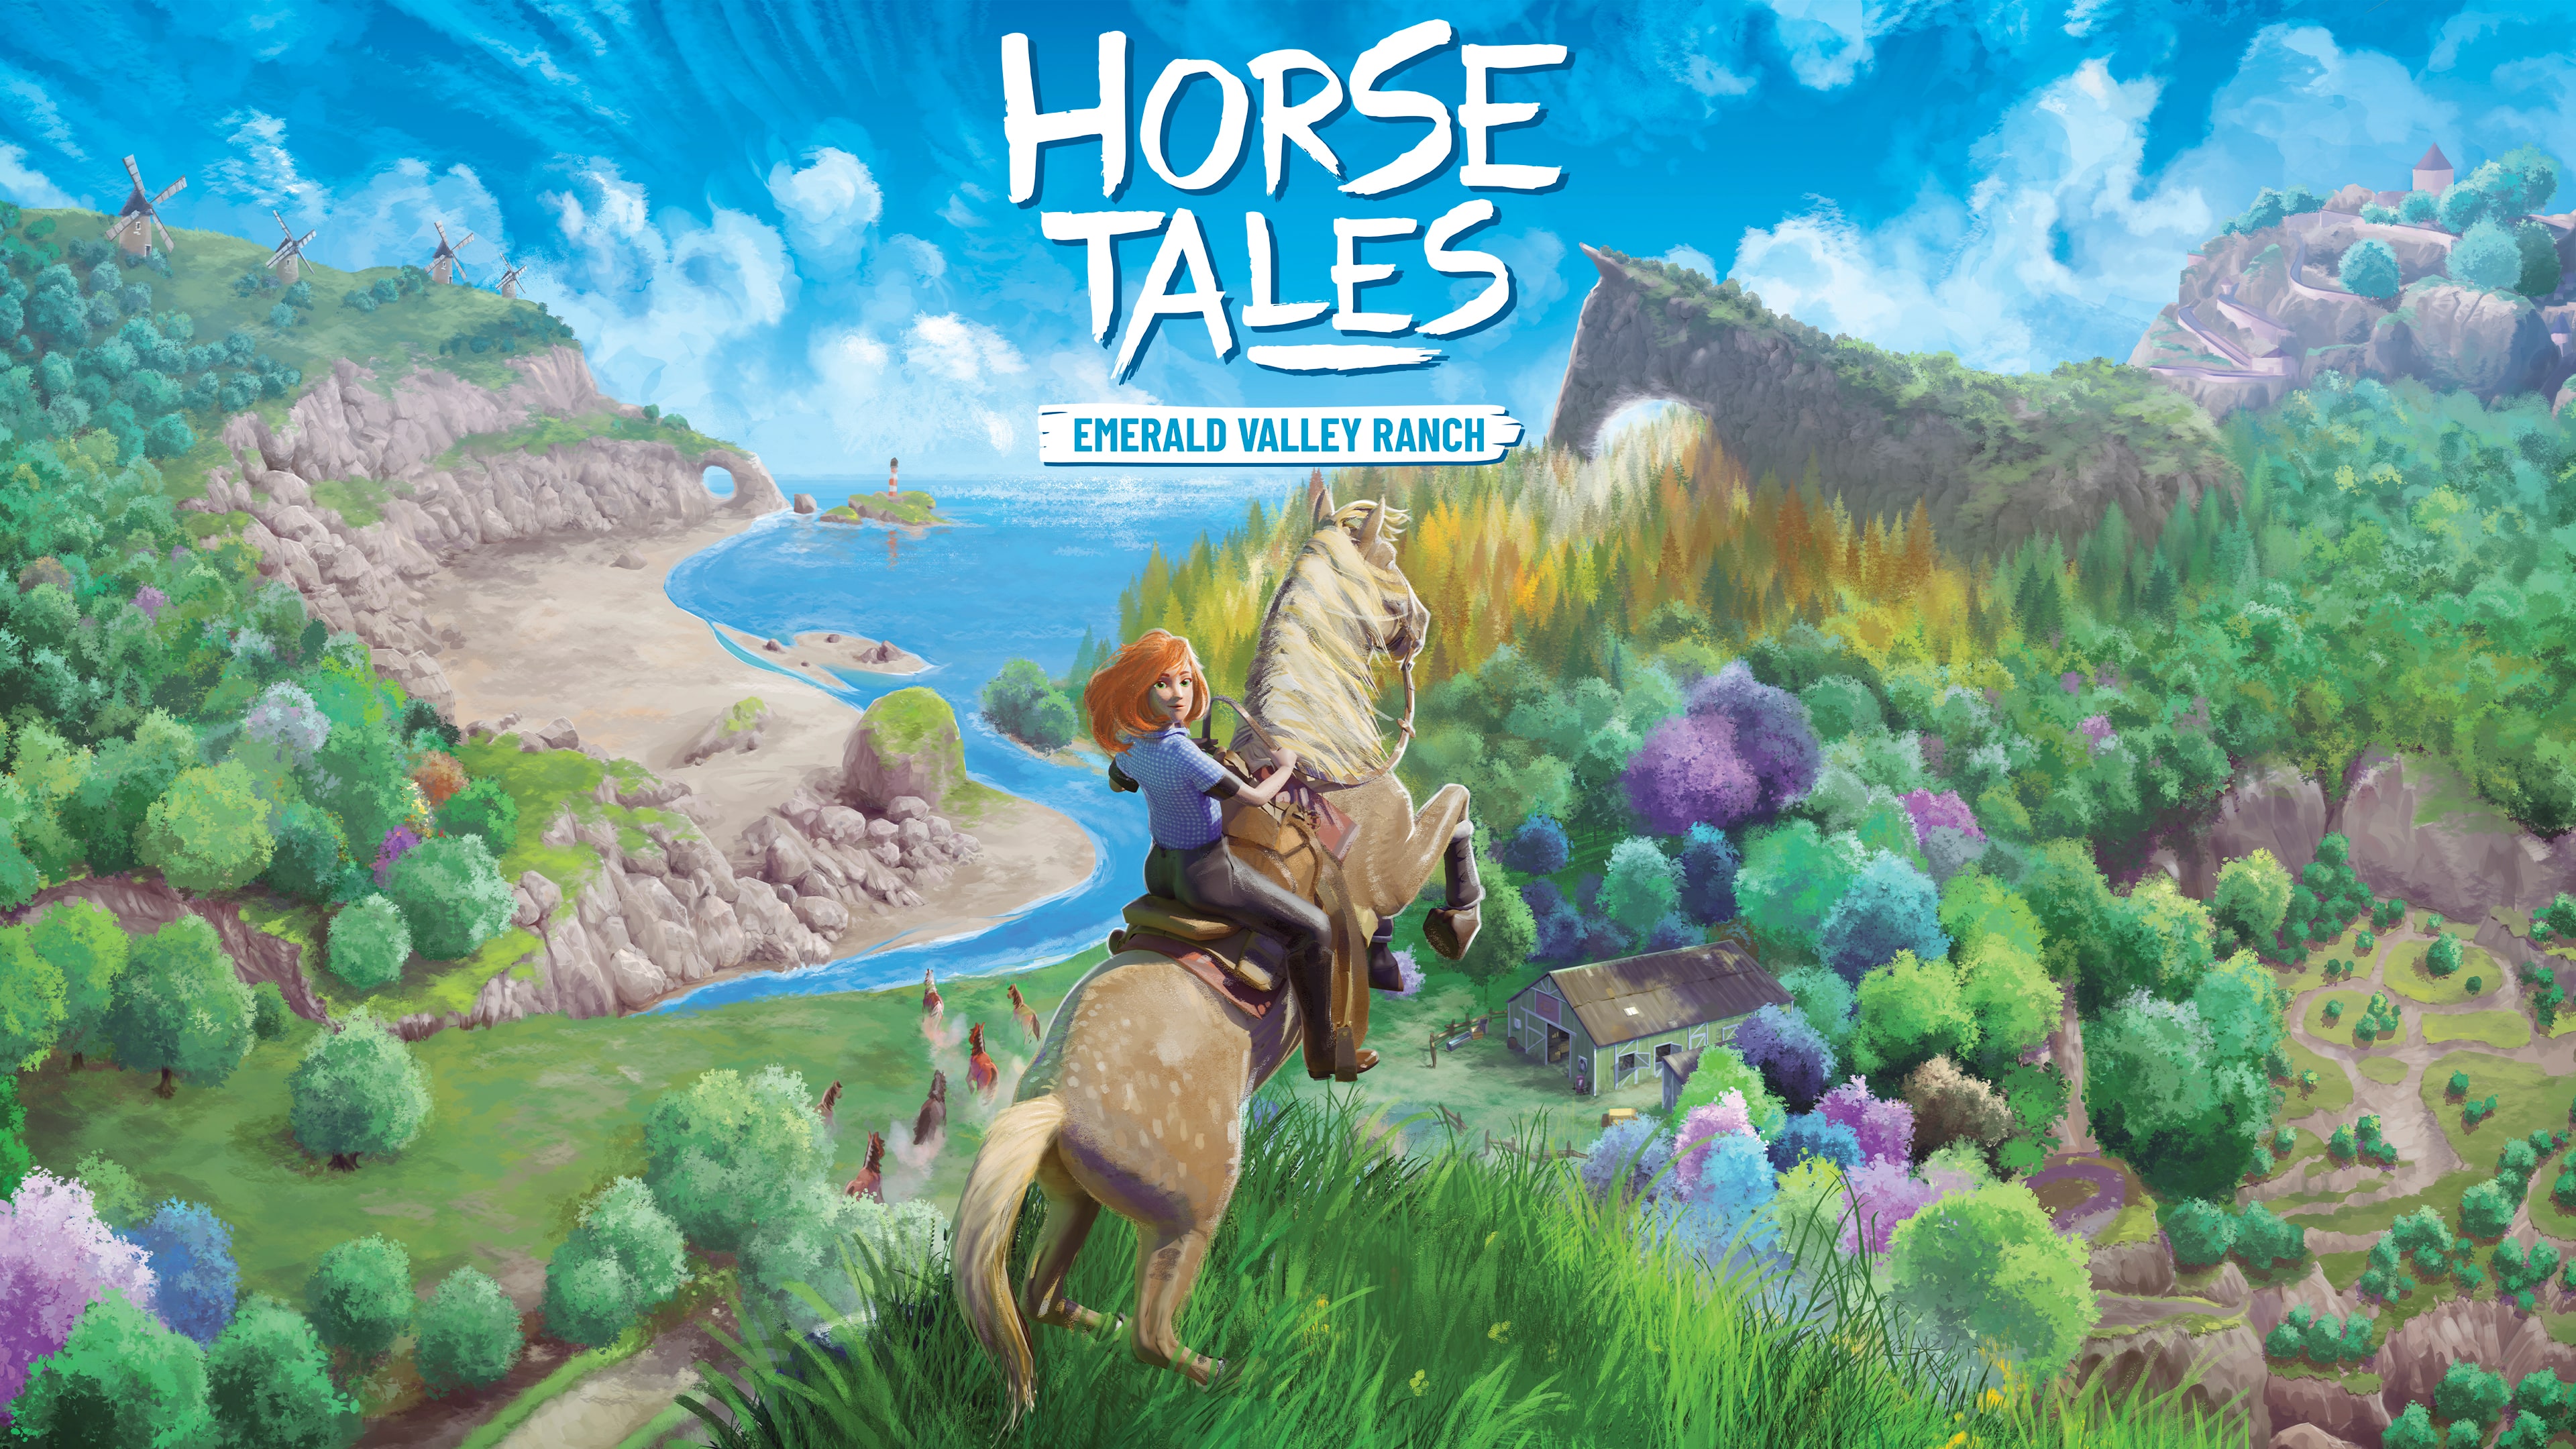 Horse Tales: Emerald Valley Ranch (Simplified Chinese, English, Korean, Japanese, Traditional Chinese)